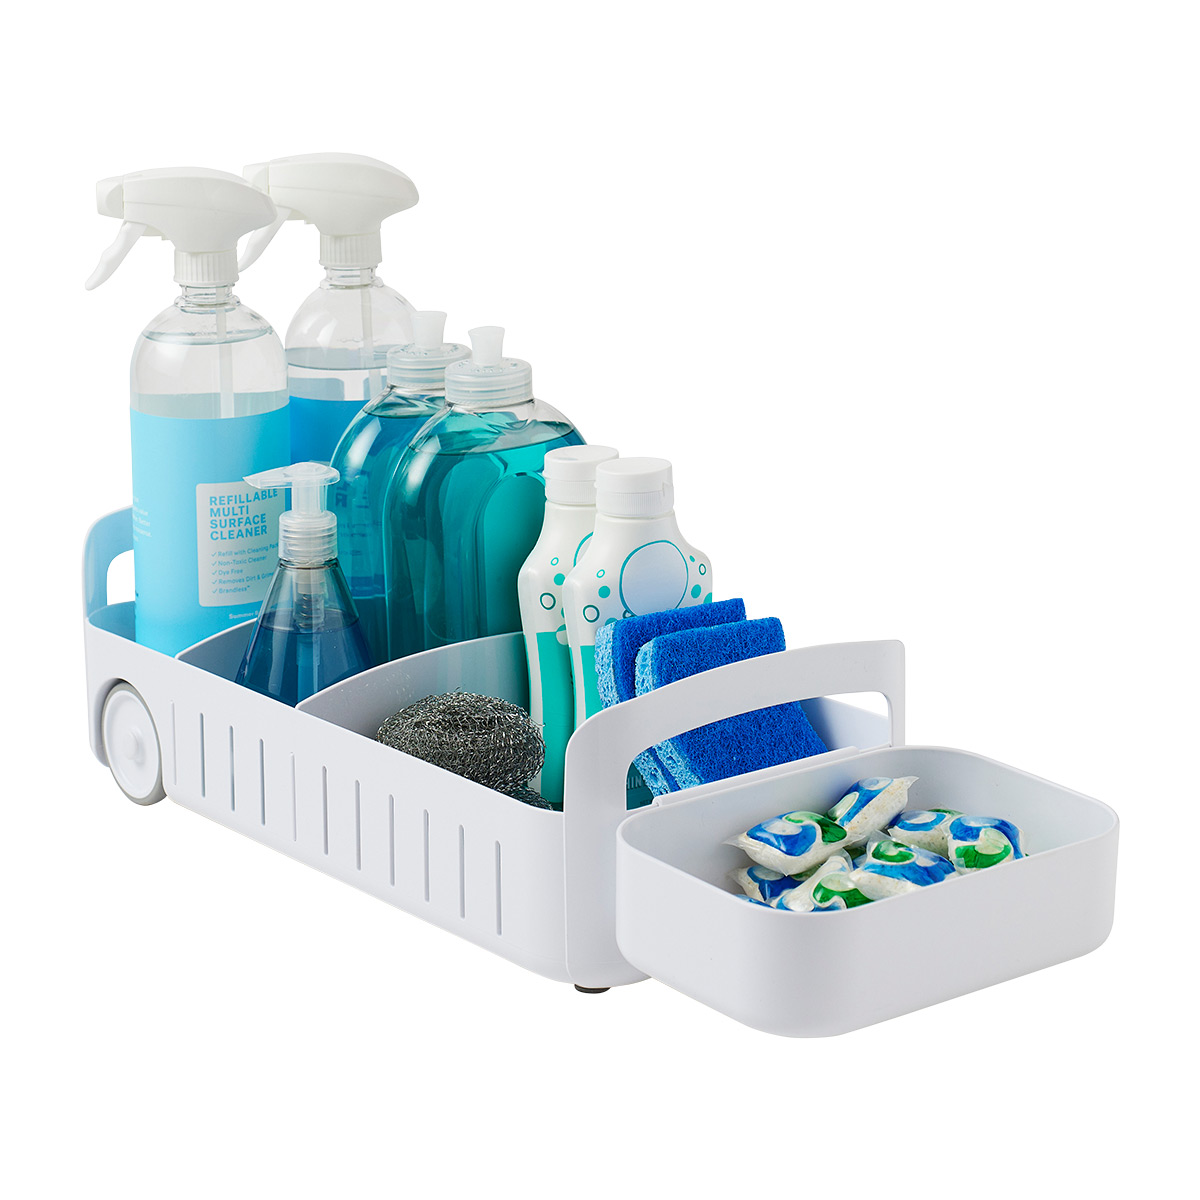 https://www.containerstore.com/catalogimages/481261/10093346-youcopia-rollout-under-sink.jpg